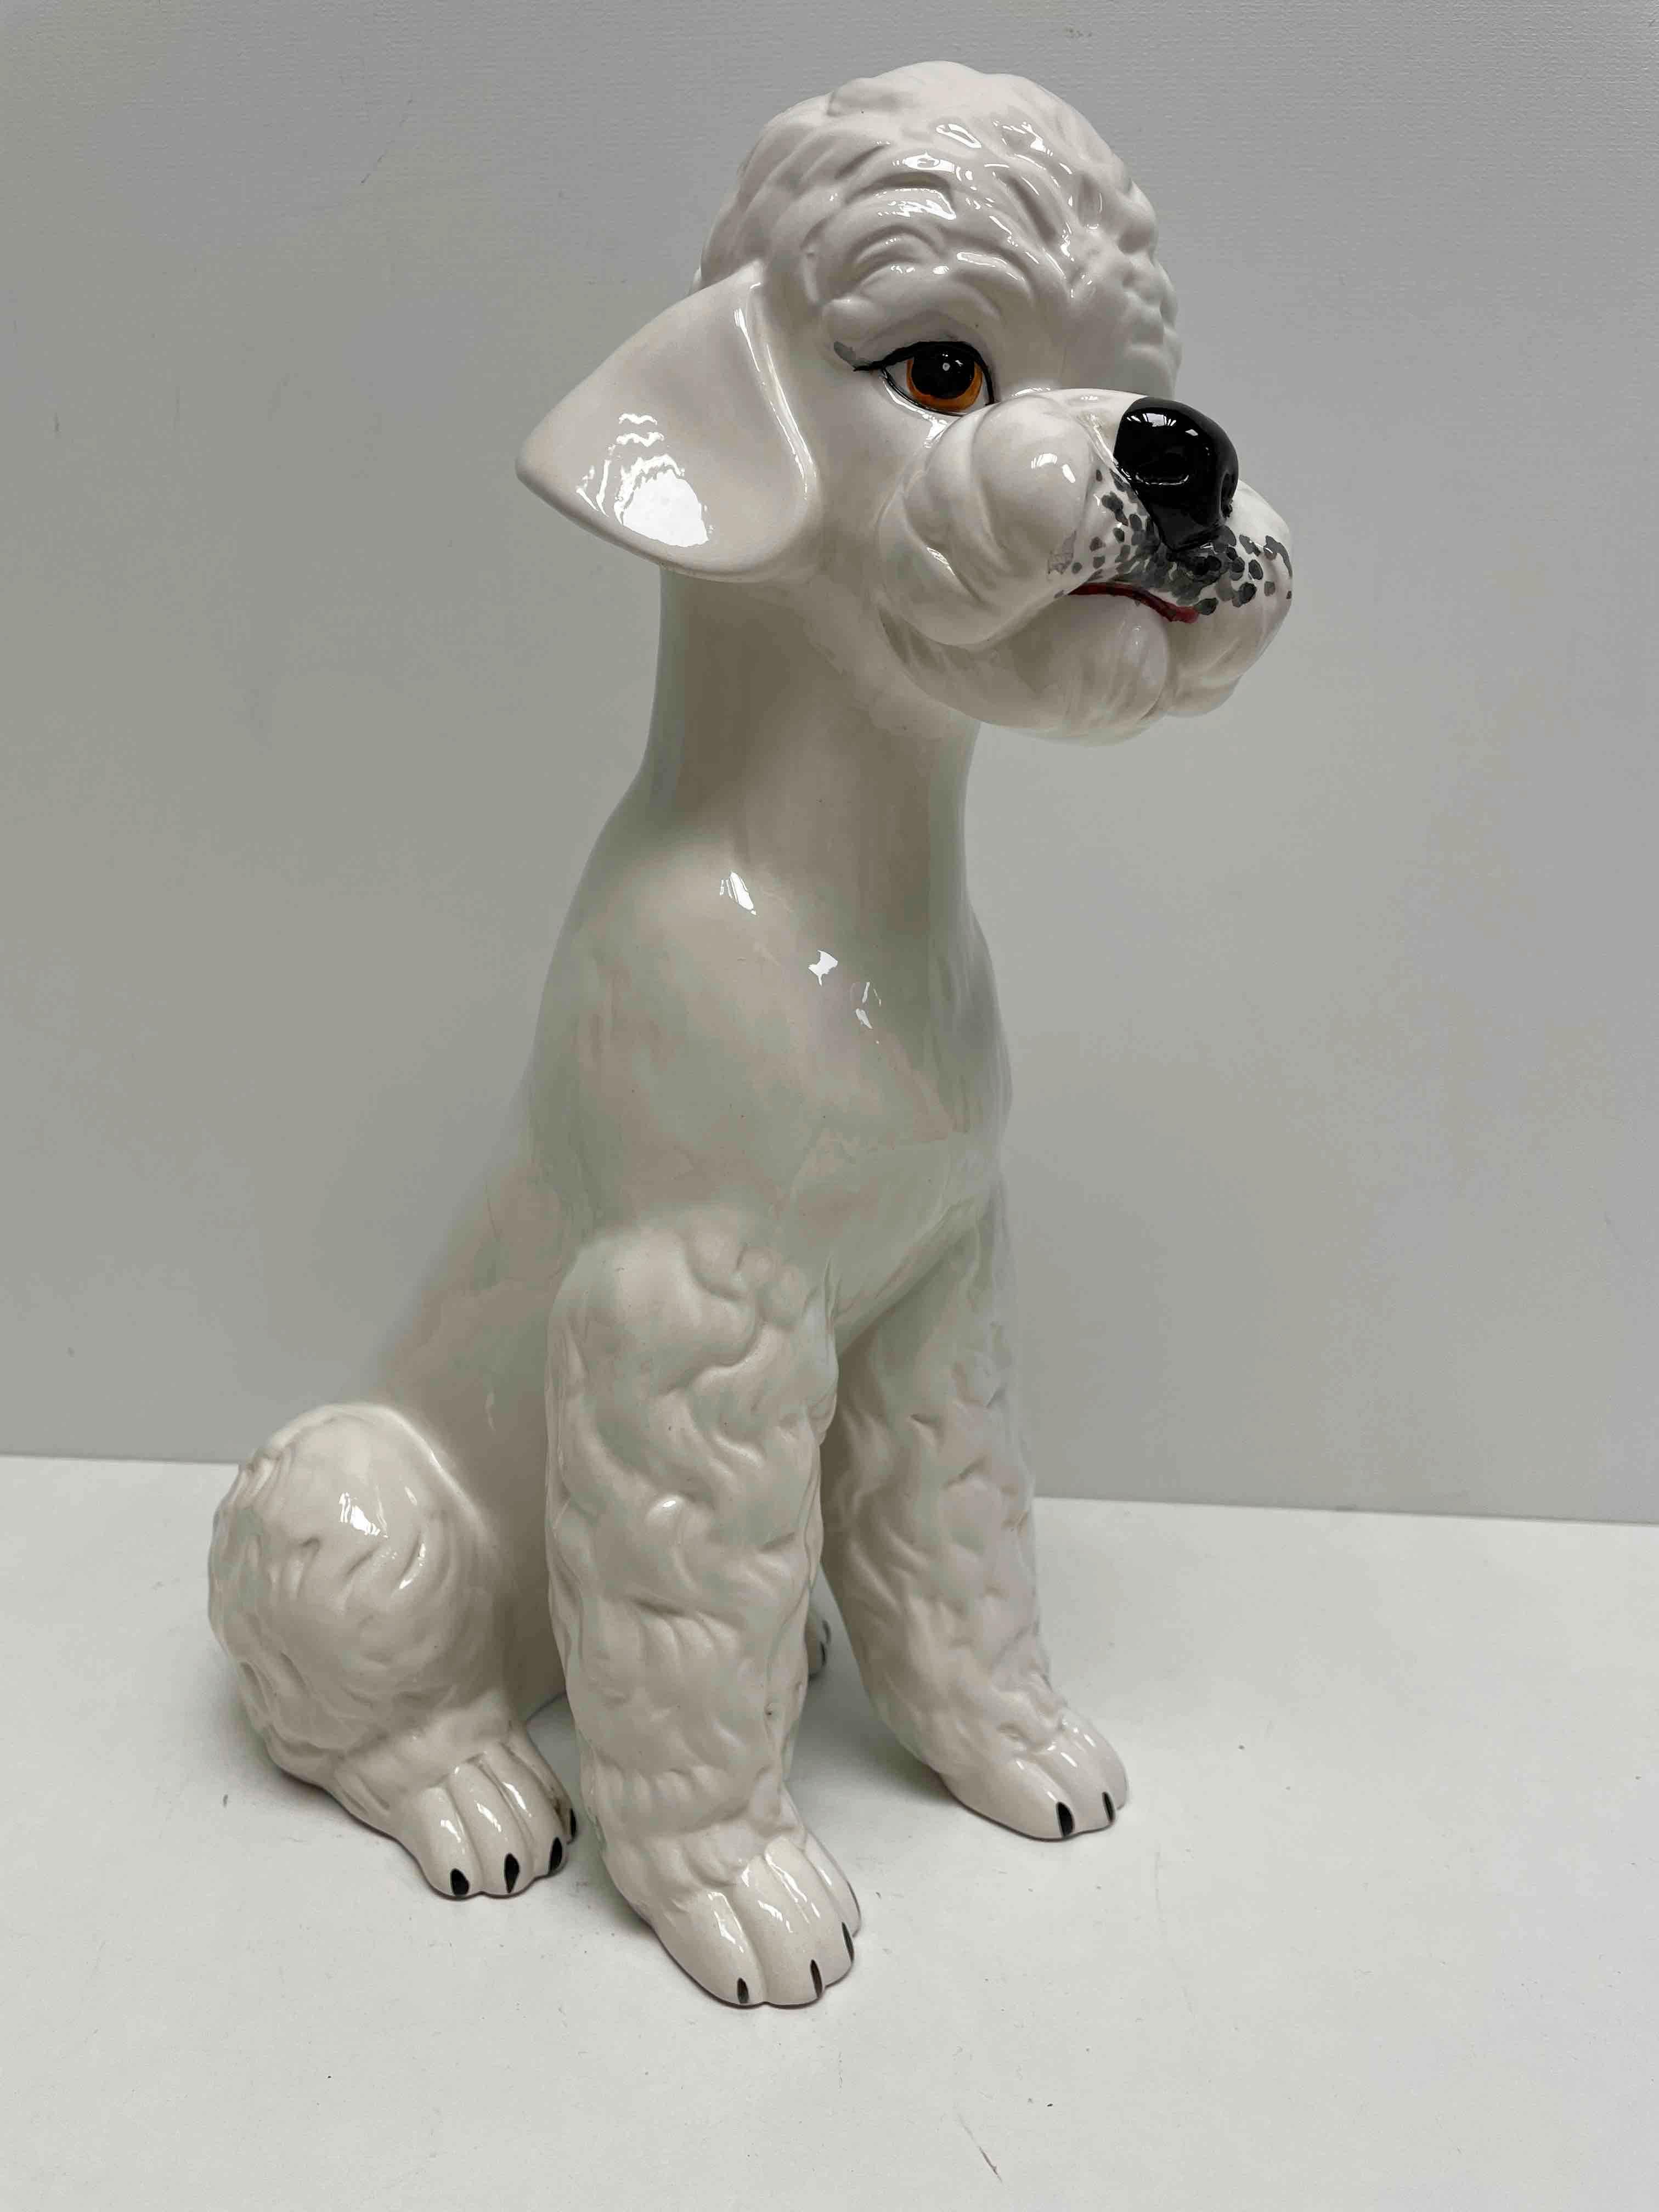 Classic early 1980s Italian Poodle Majolica ceramic dog statue figurine. Nice addition to your room or entry hall. Made of Majolica ceramic, hand painted. Signed on the ground.